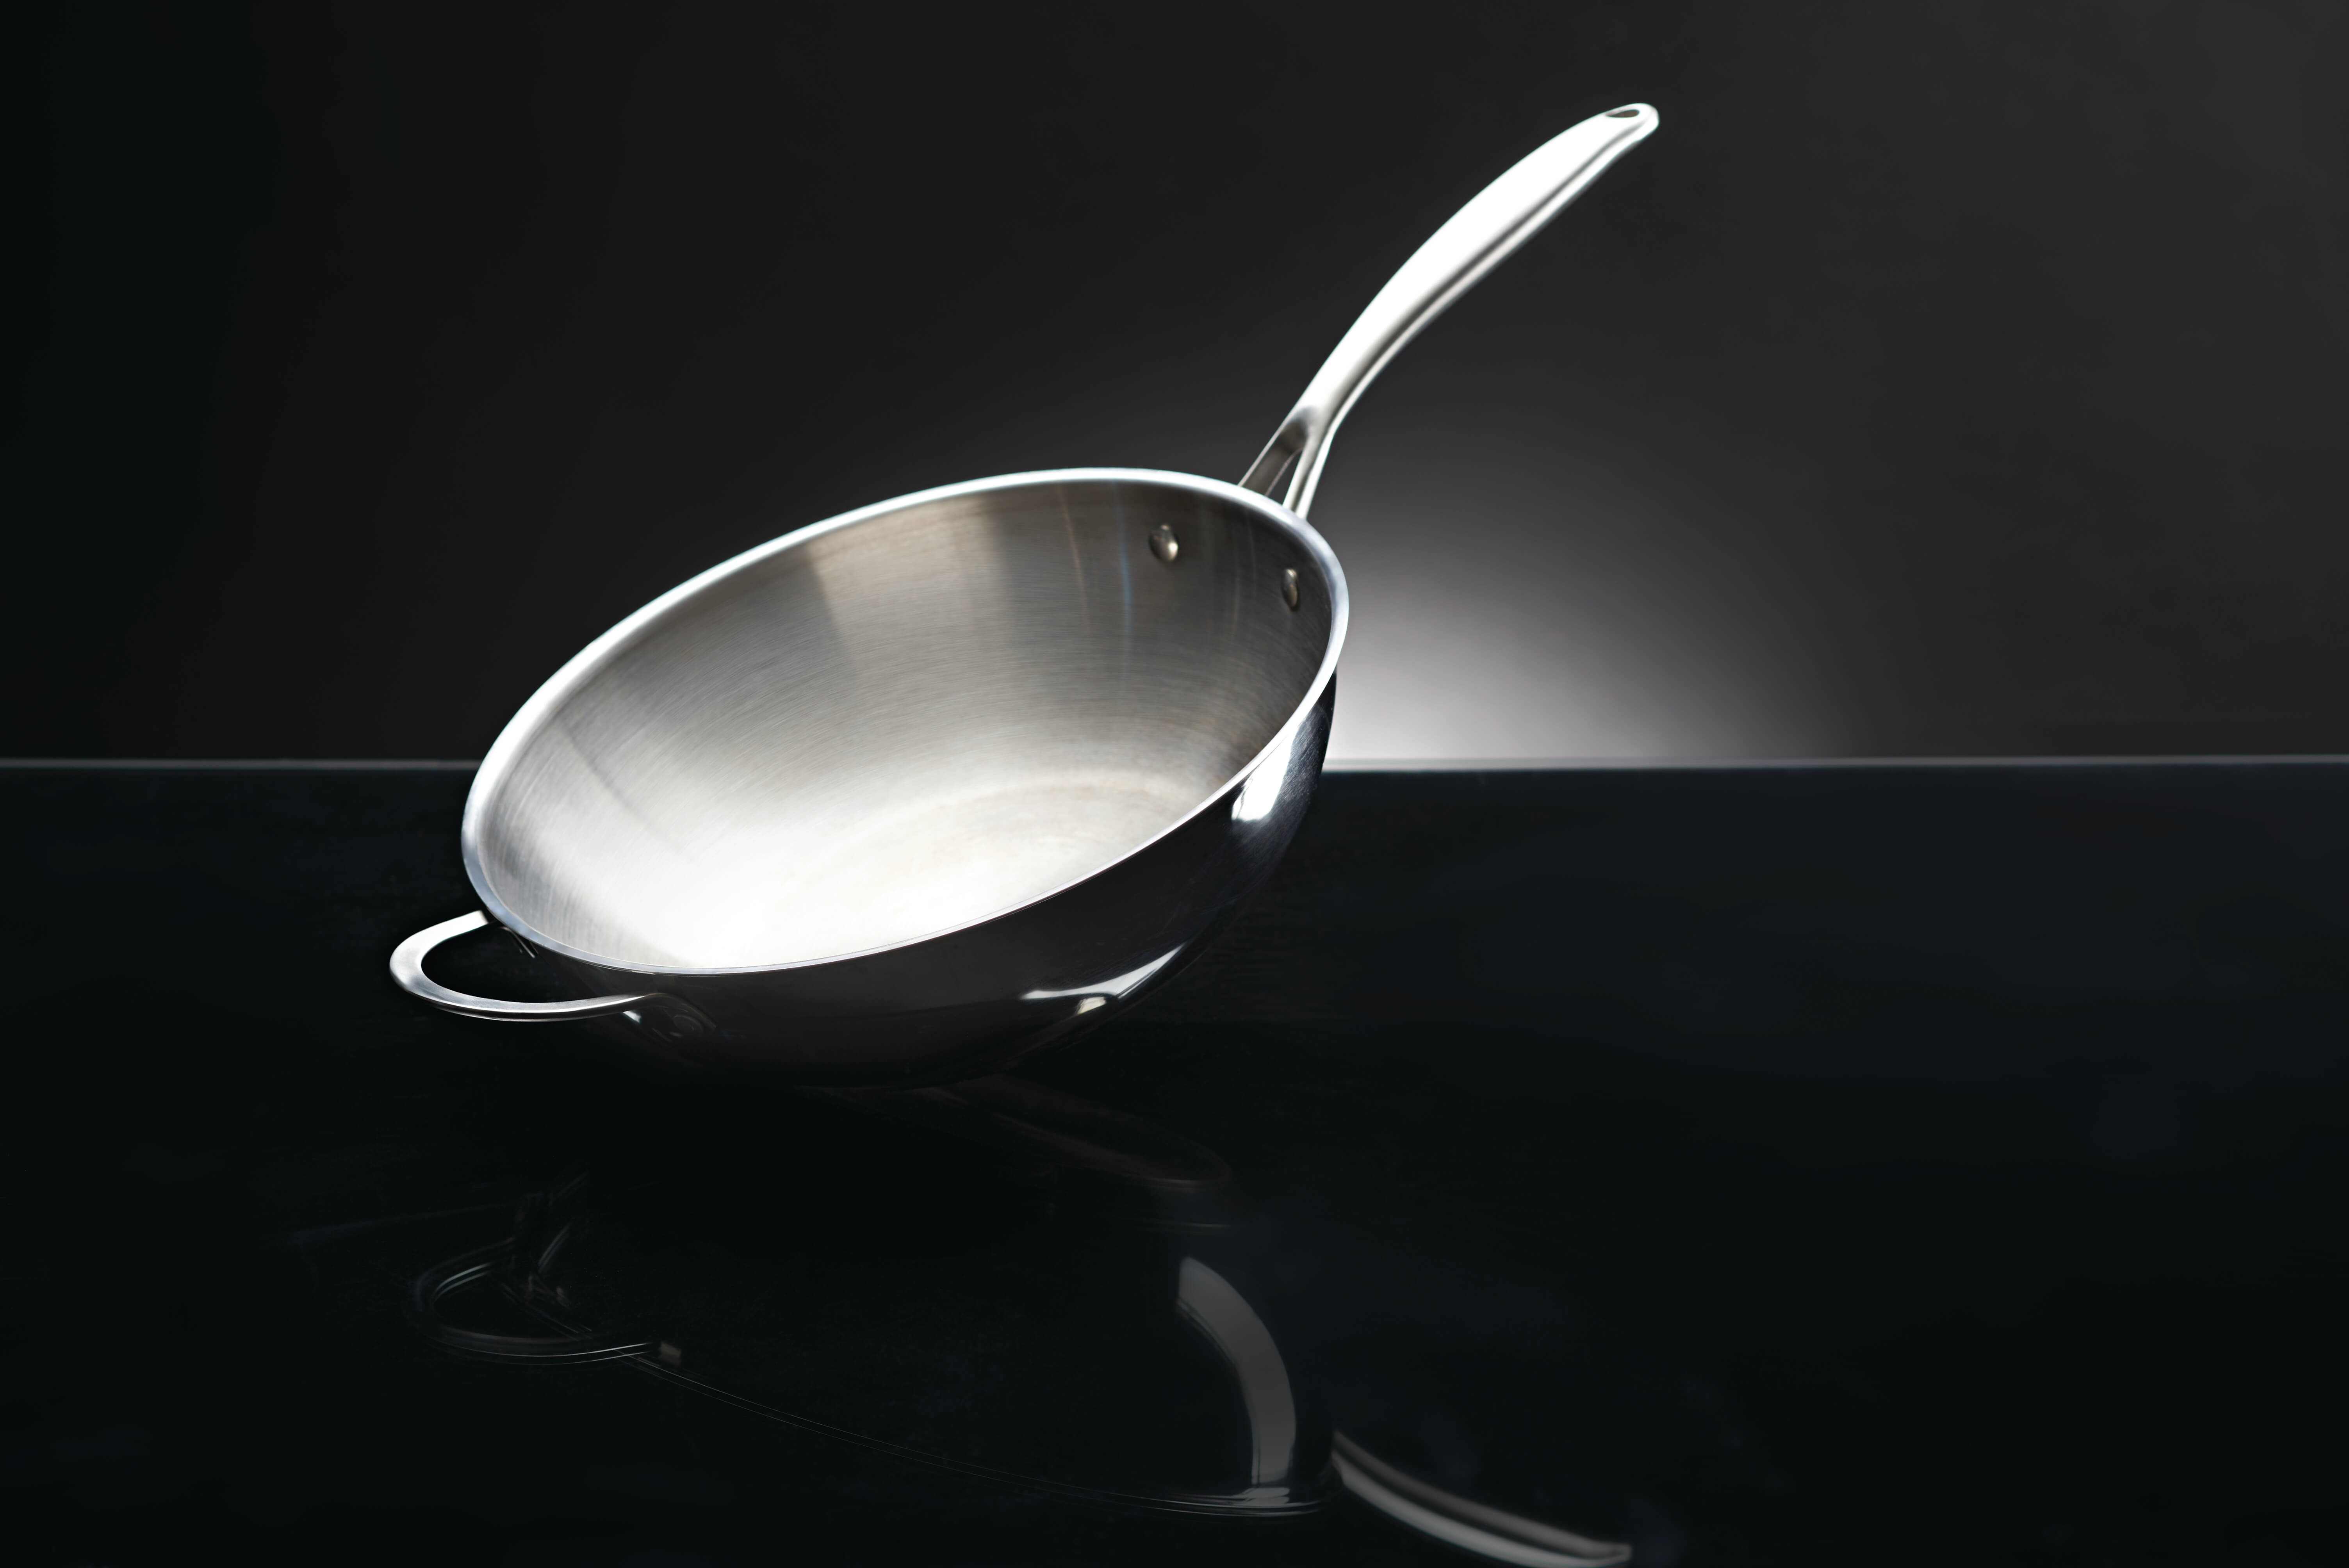 Stainless Steel Wok - image 1 of 5